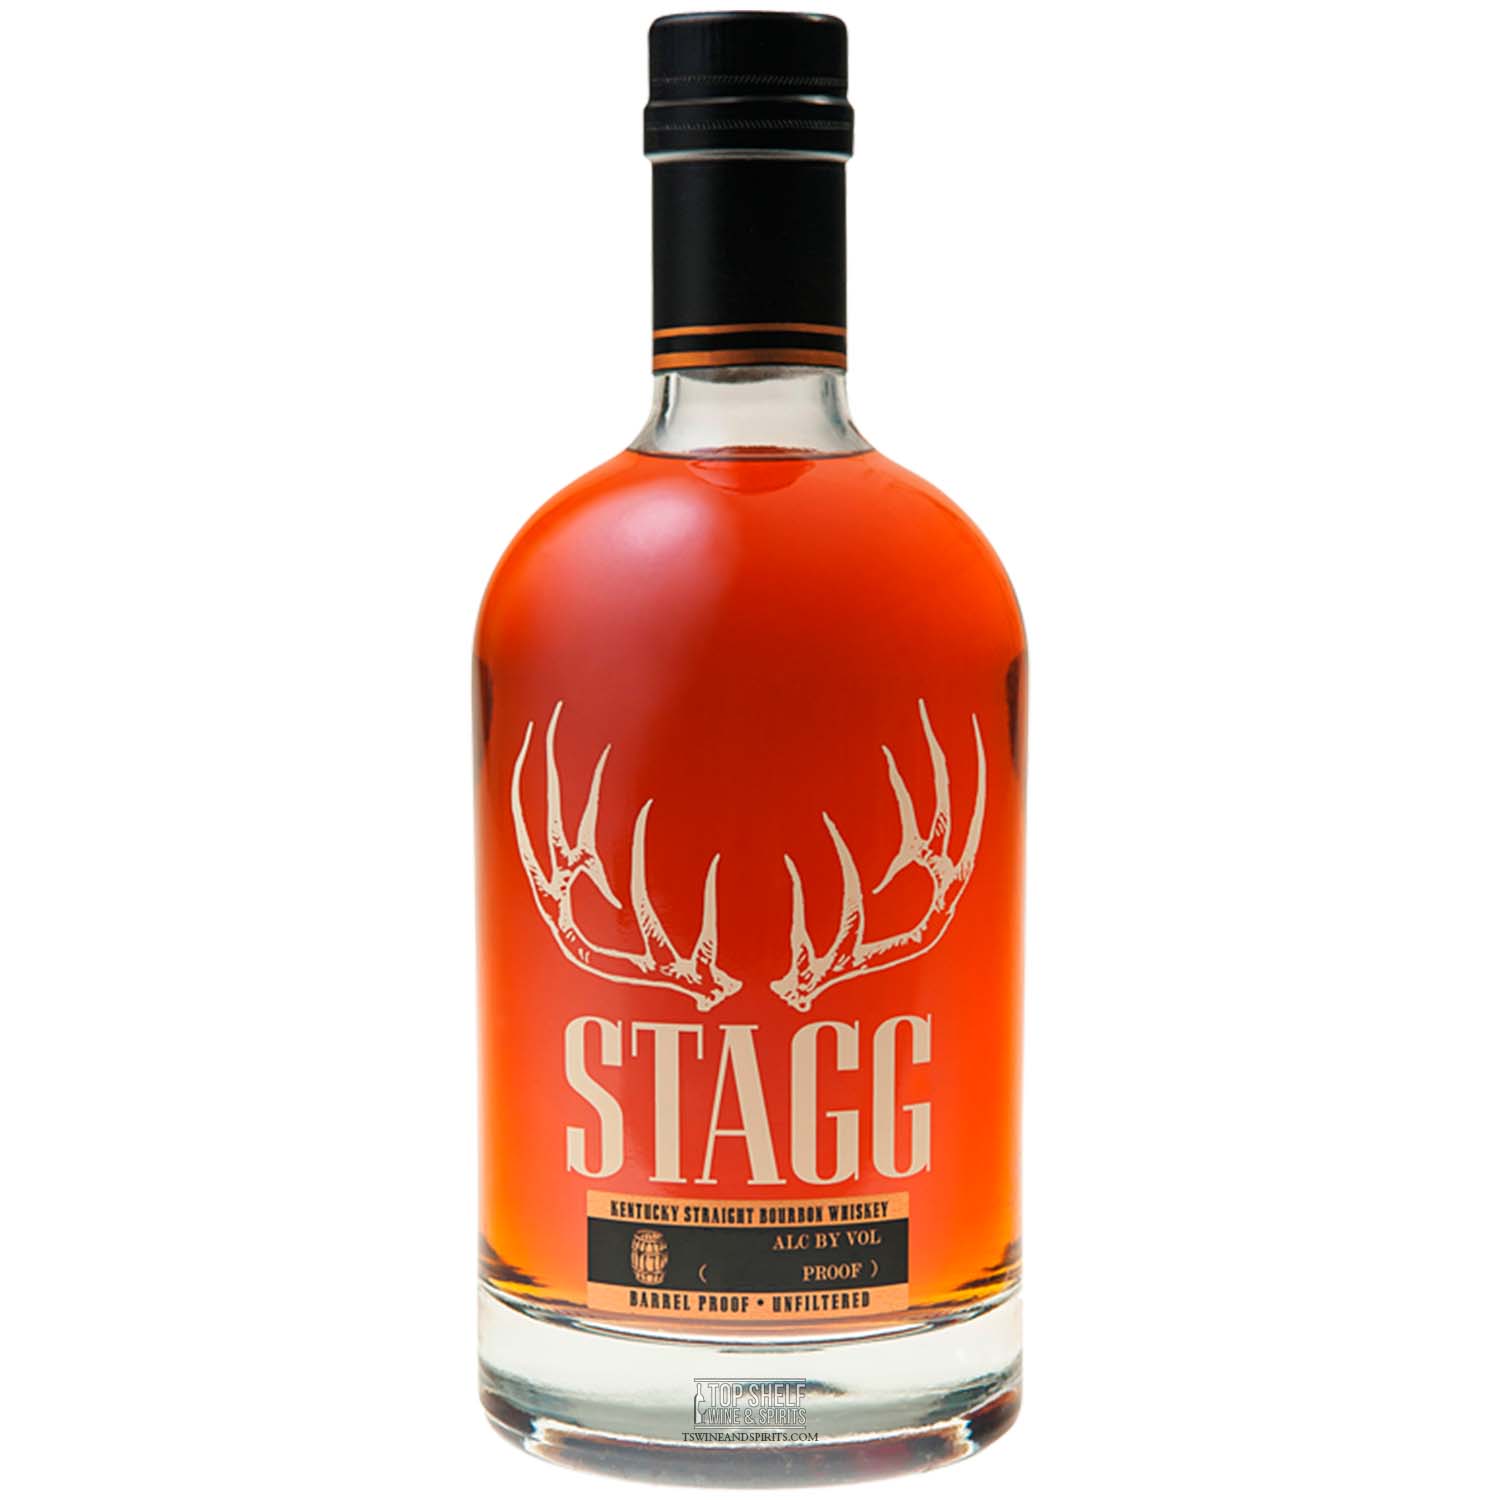 Stagg Unfiltered Kentucky Straight Bourbon 131.1 Proof